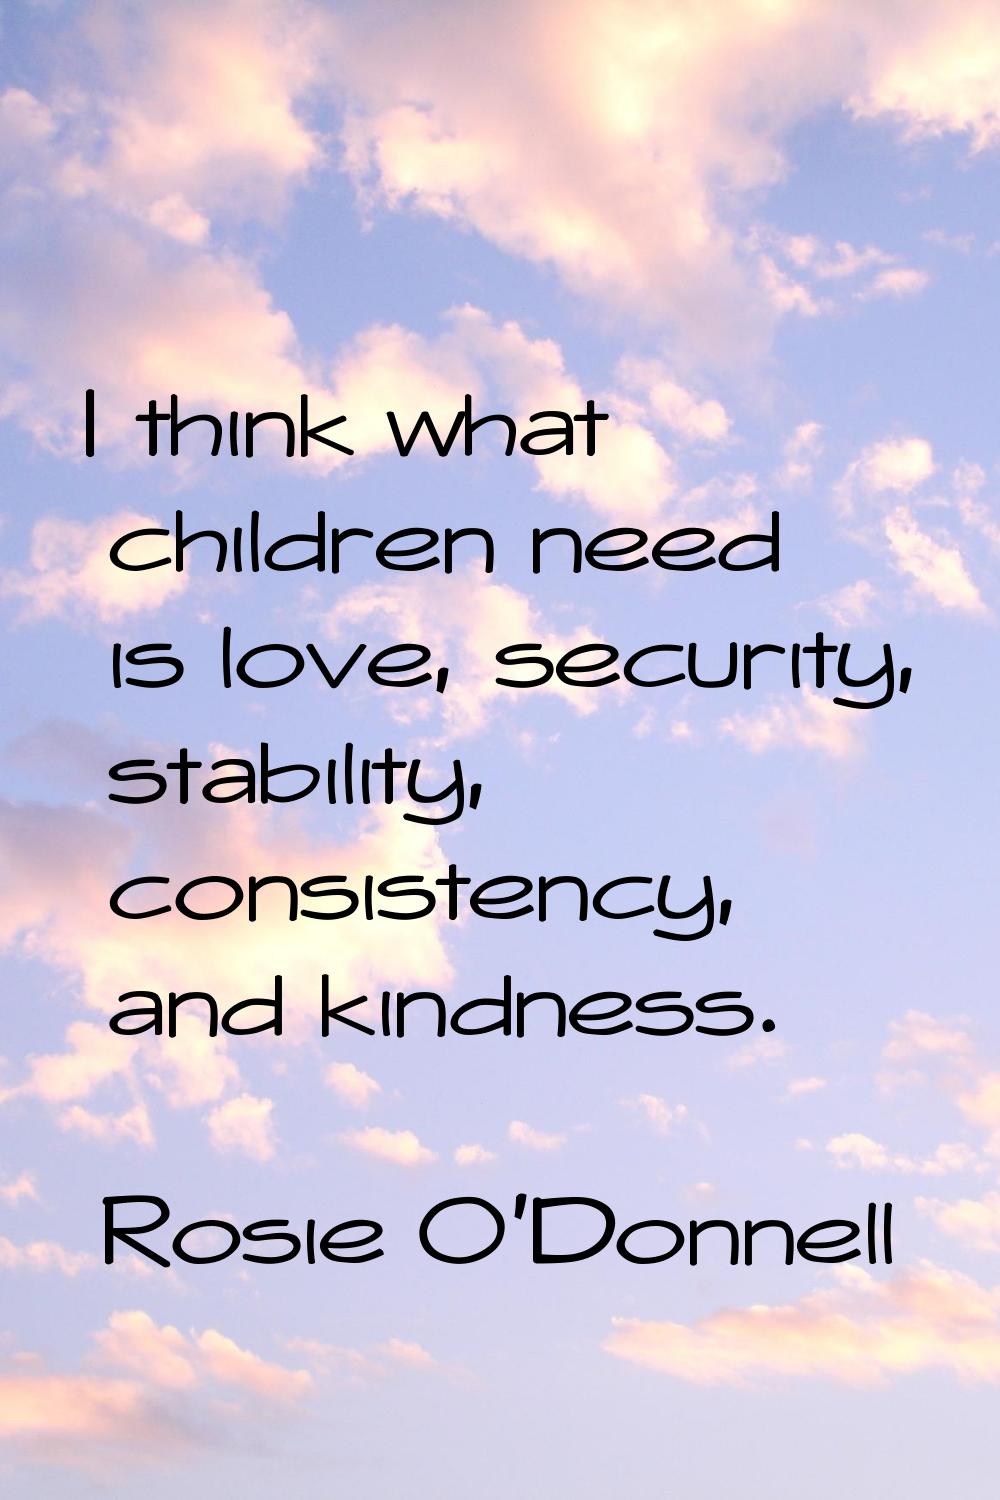 I think what children need is love, security, stability, consistency, and kindness.